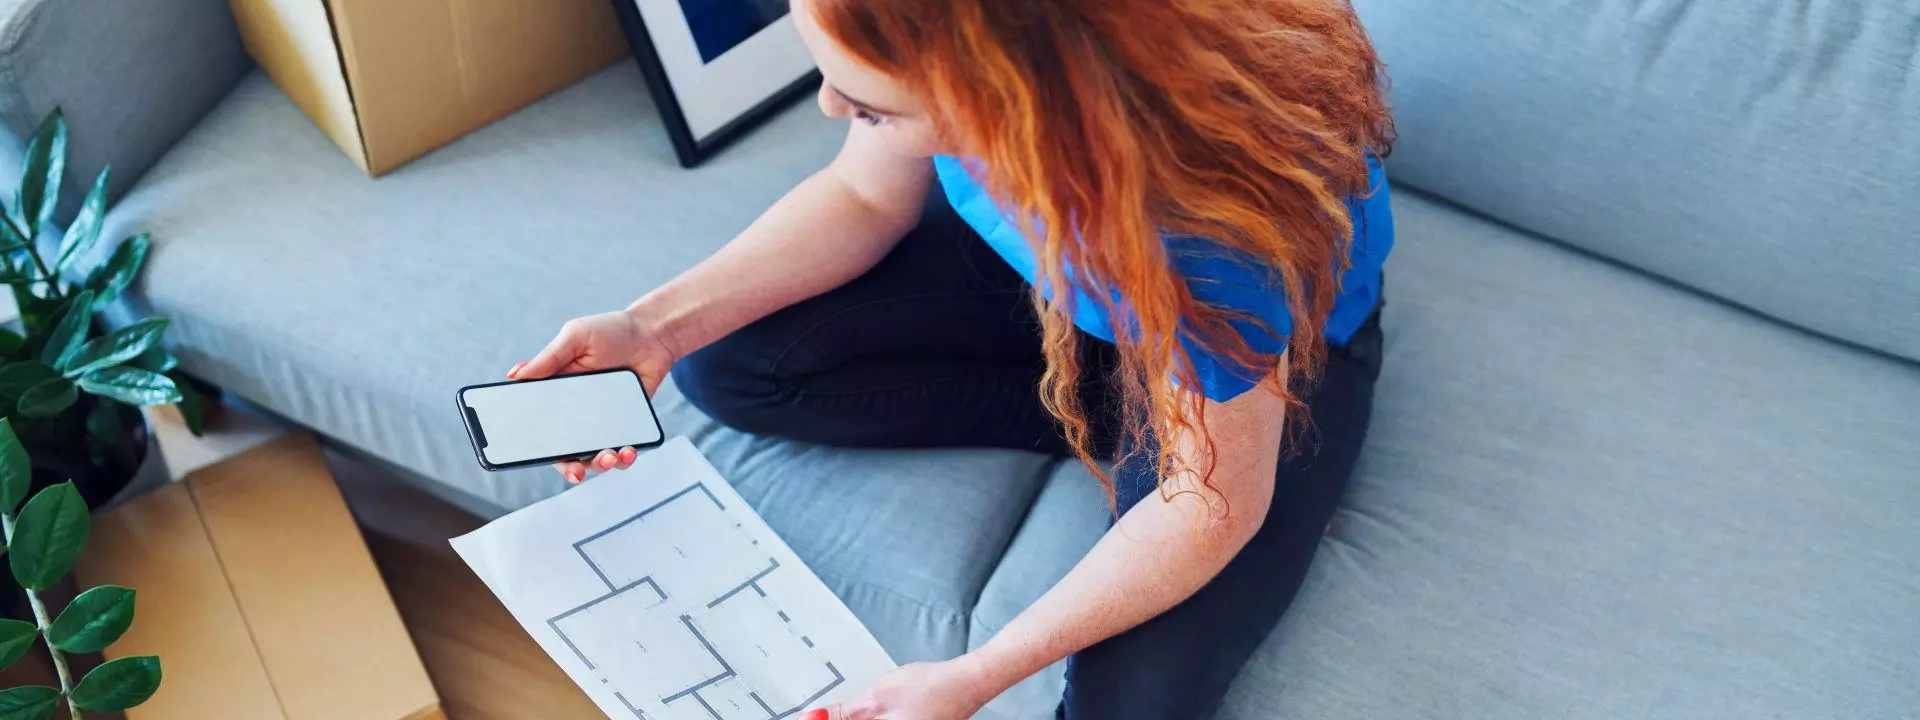 Red haired lady looking at floor plan 